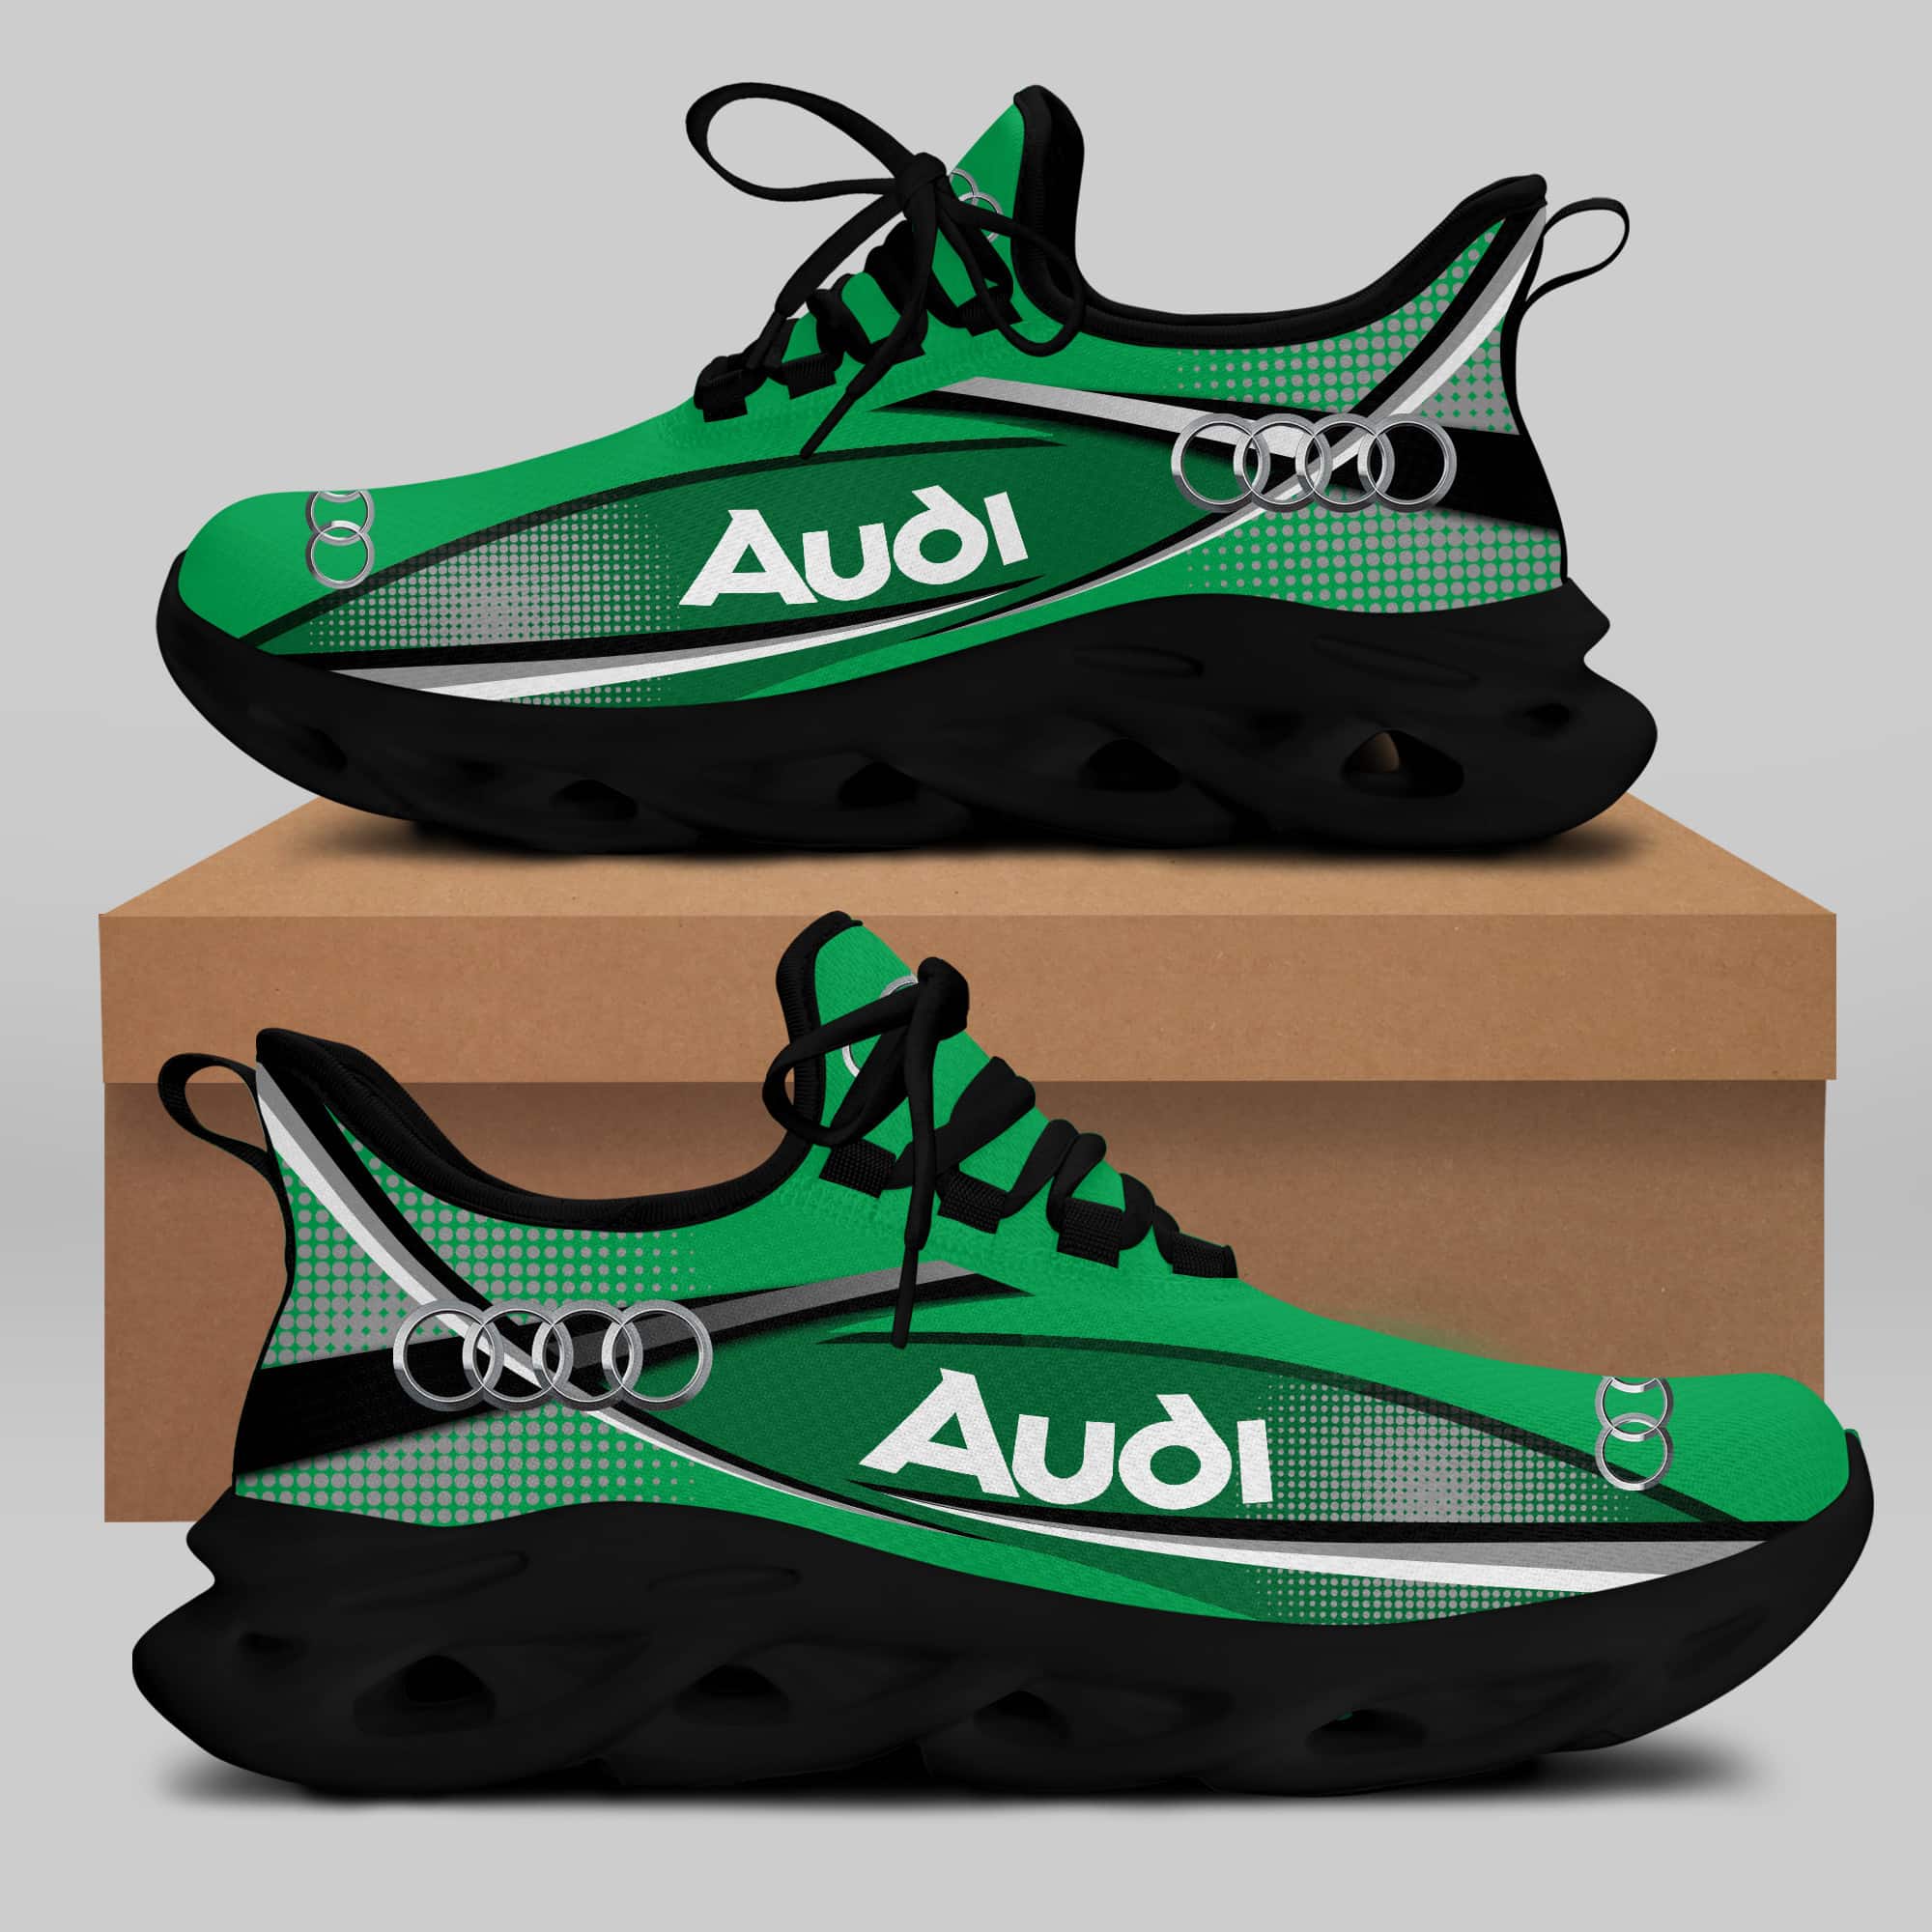 Audi Sport Running Shoes Max Soul Shoes Sneakers Ver 49 1